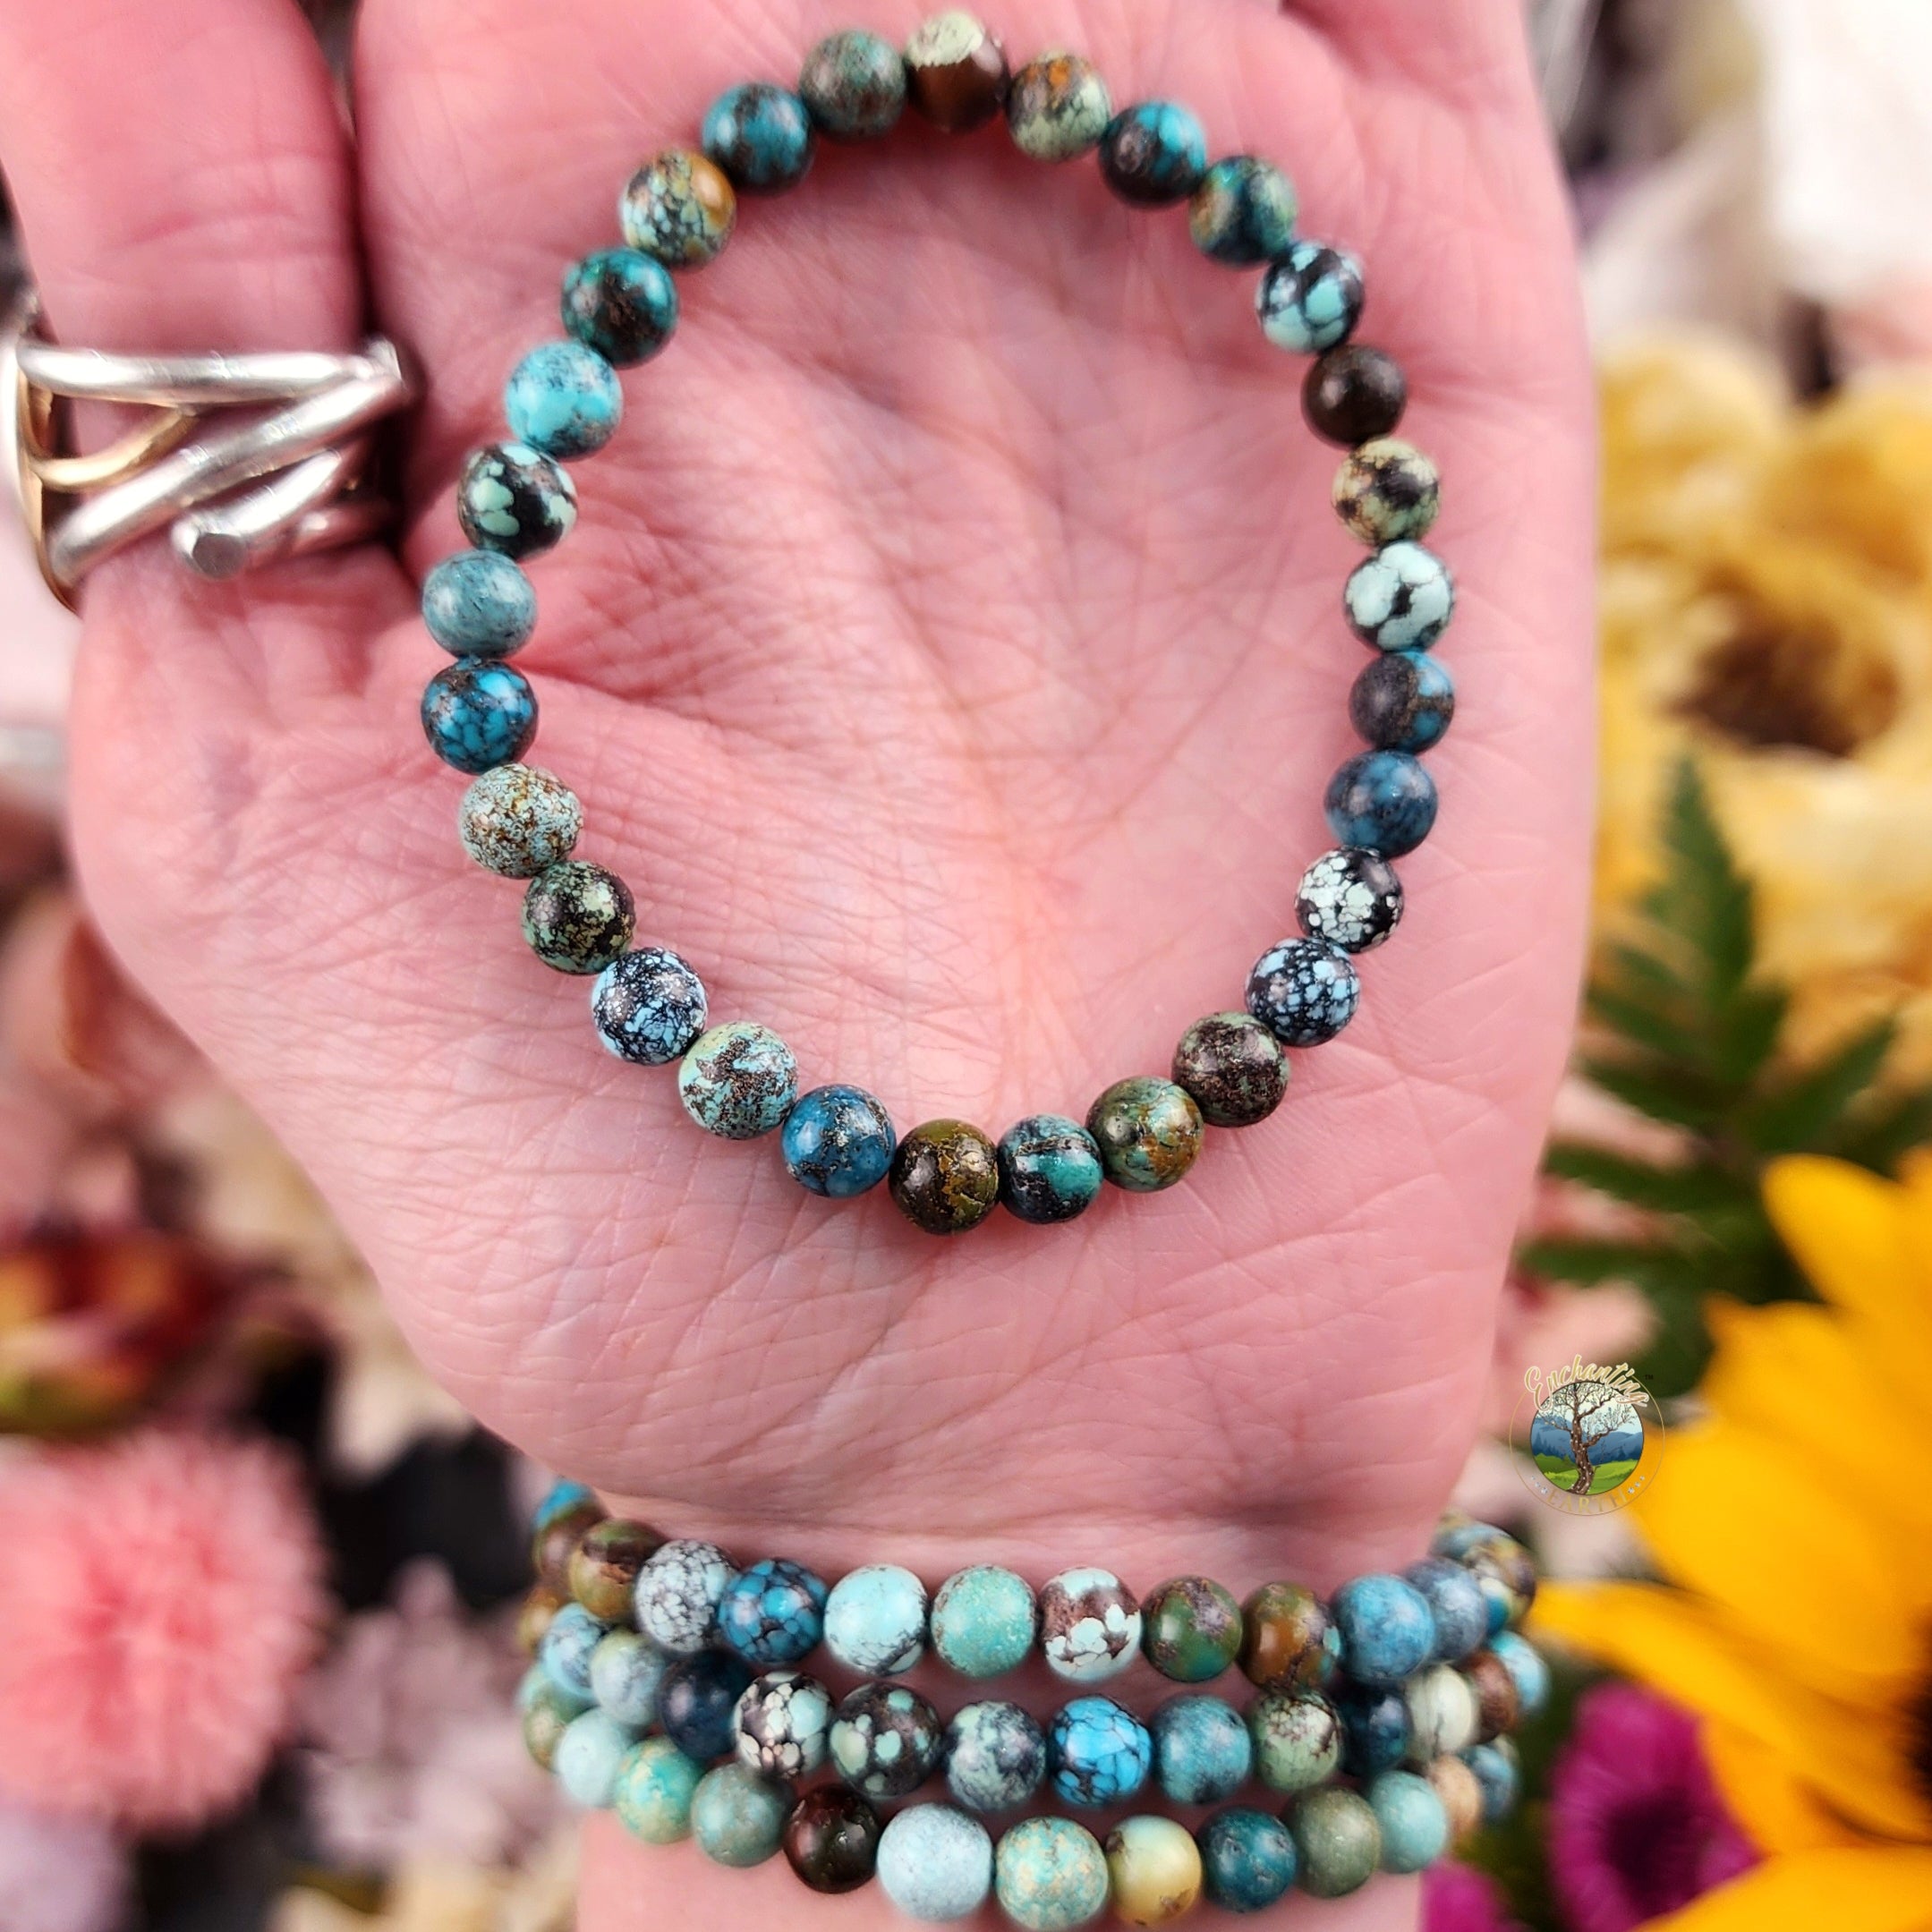 Tibetan Turquoise Bracelet for Good Luck, Love, Prosperity and Protection